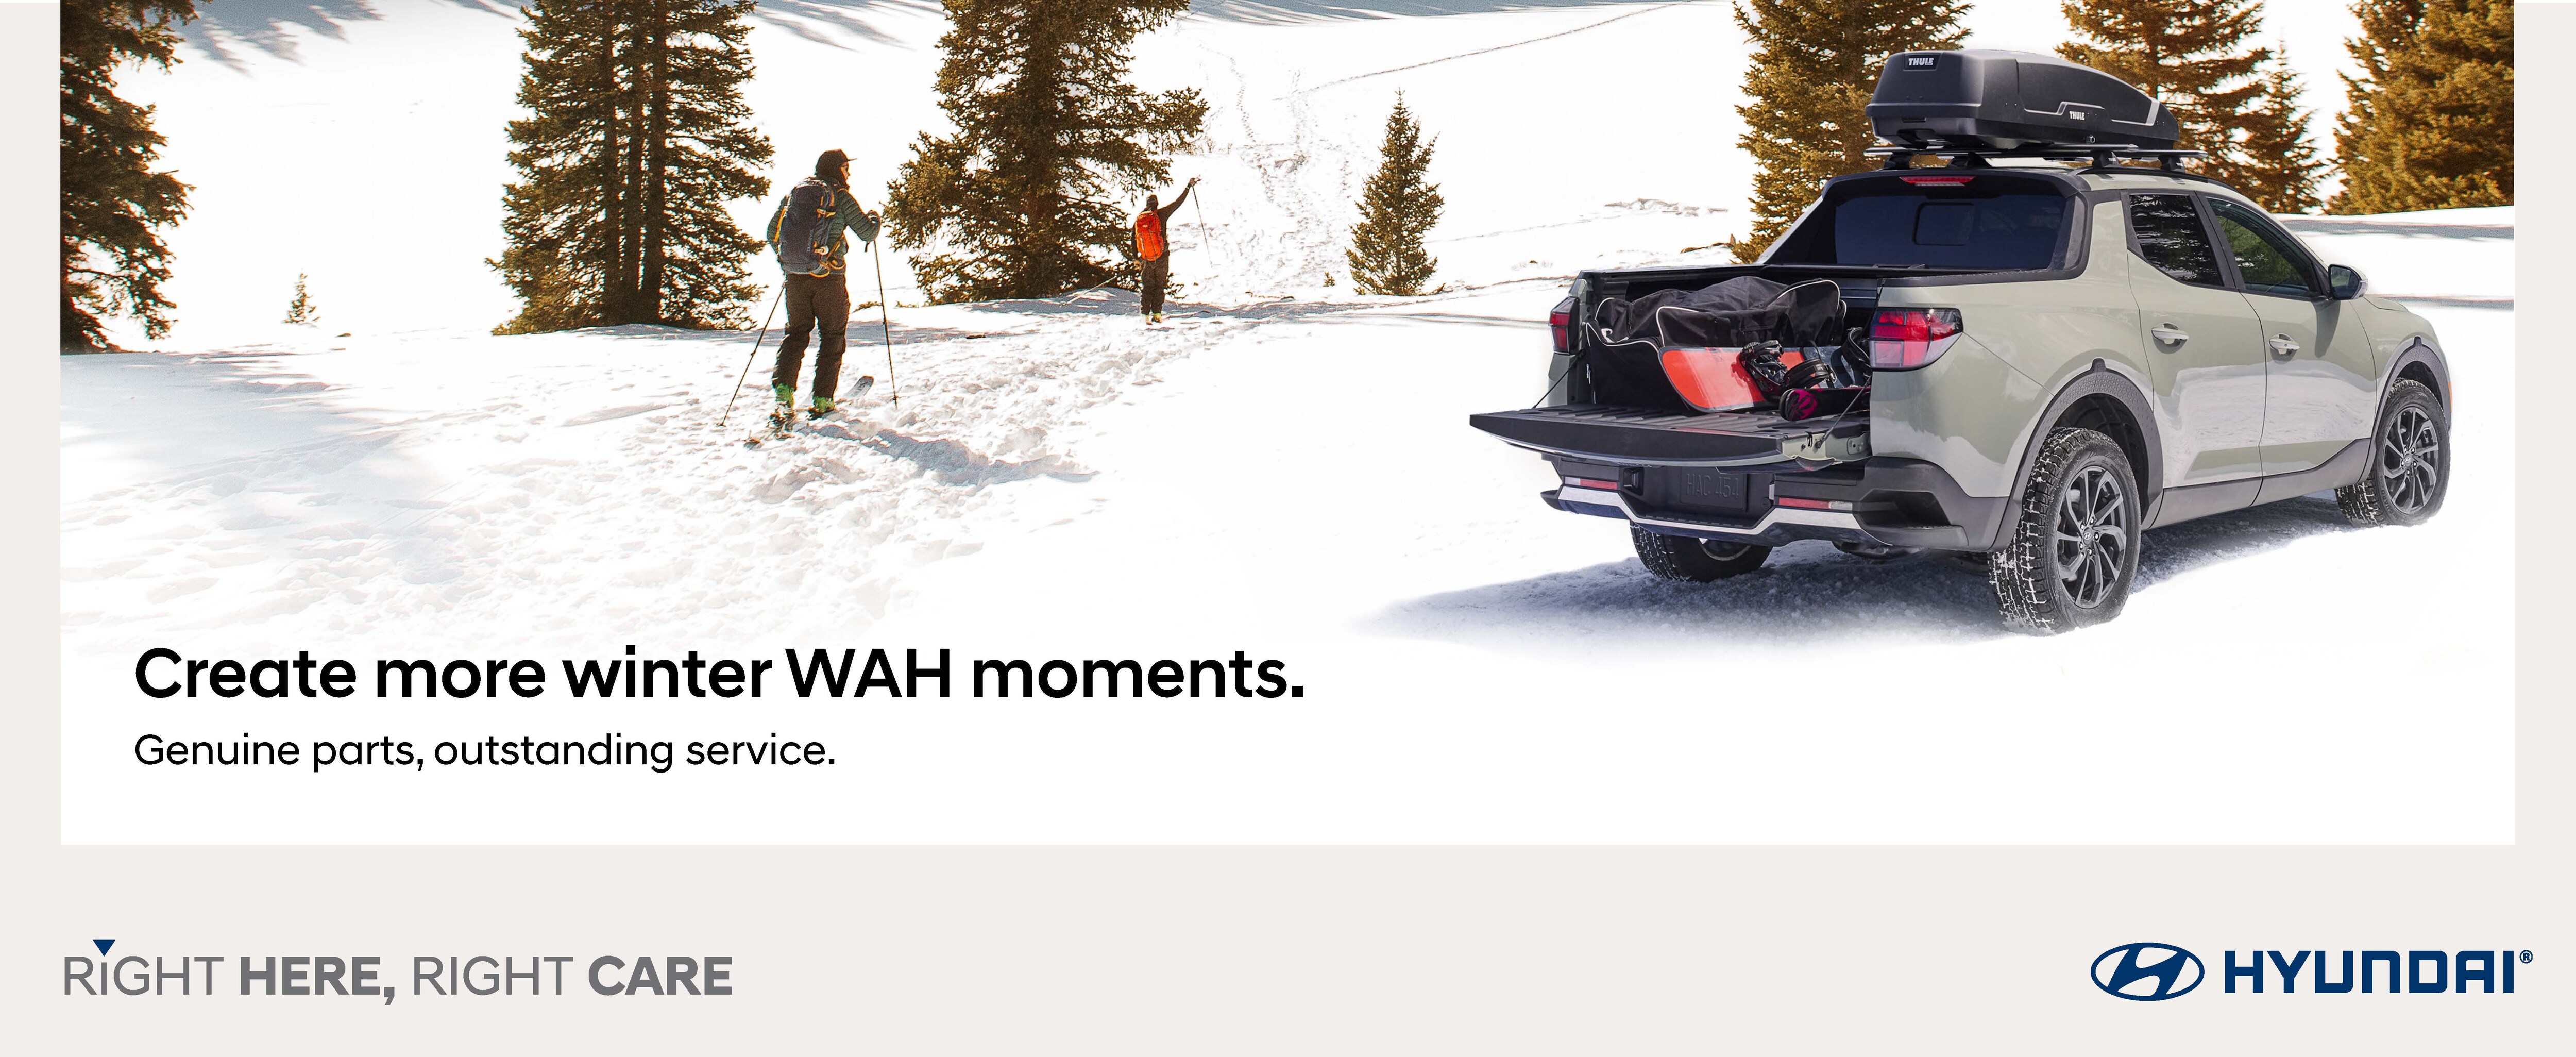 Create more winter WAH moments.